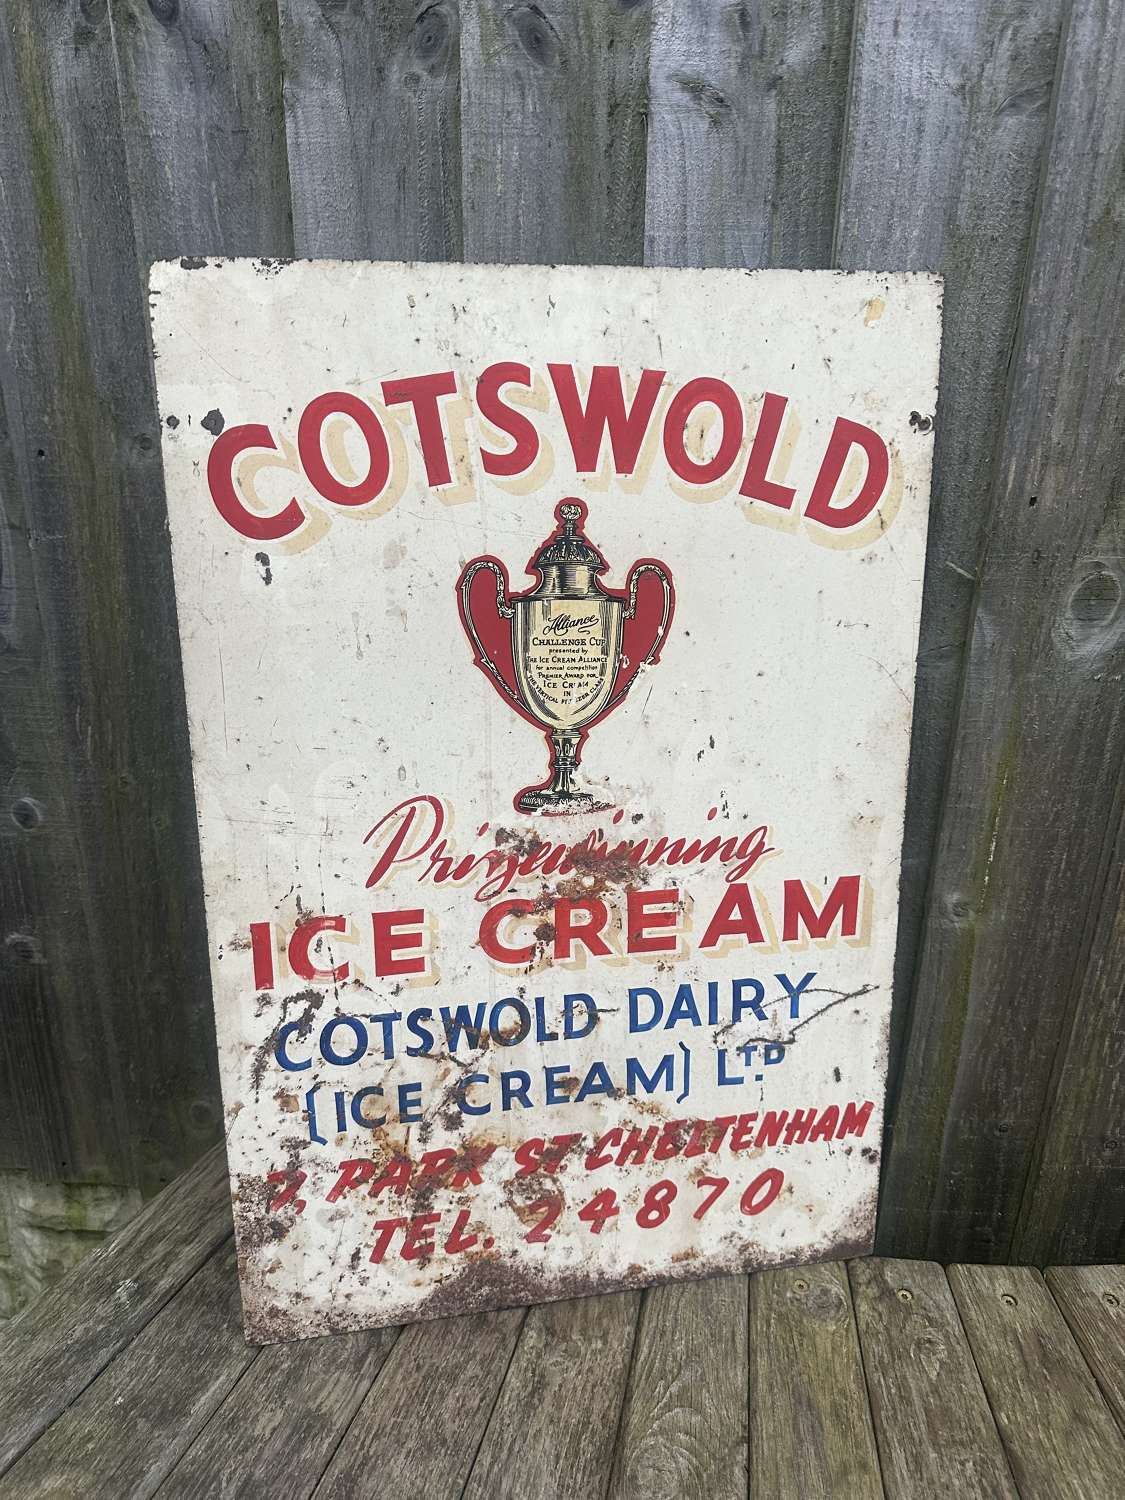 Unusual Cotswold ice cream advertising sign